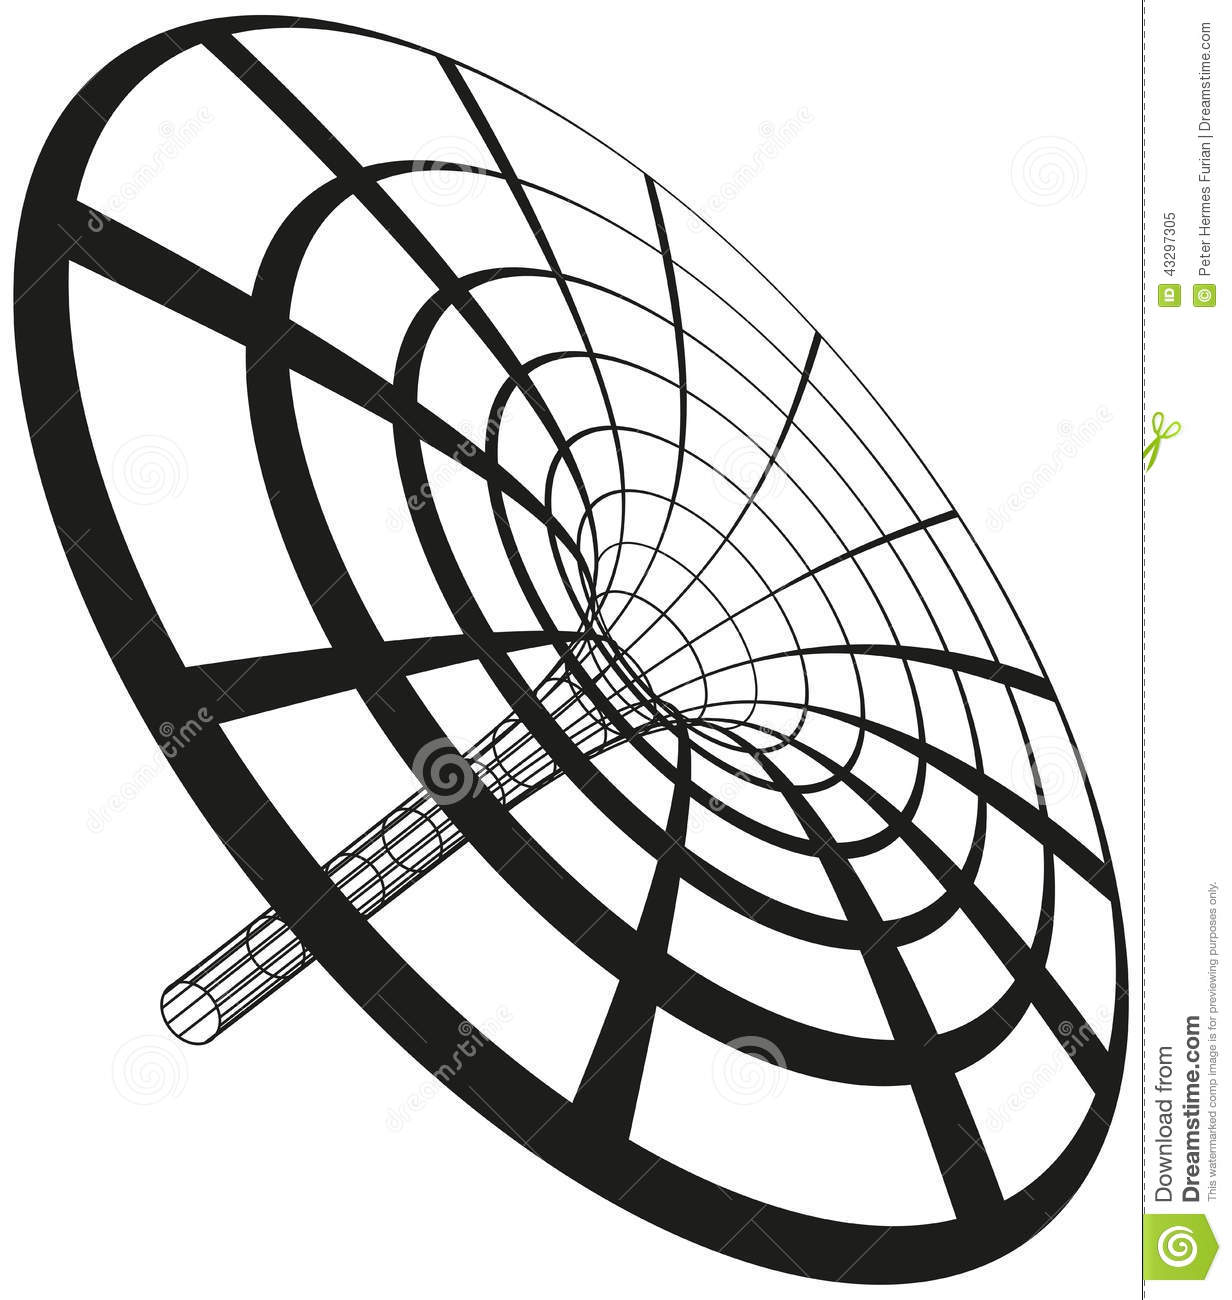 Black Hole Funnel Generated With Circles And Lines  Illustration On